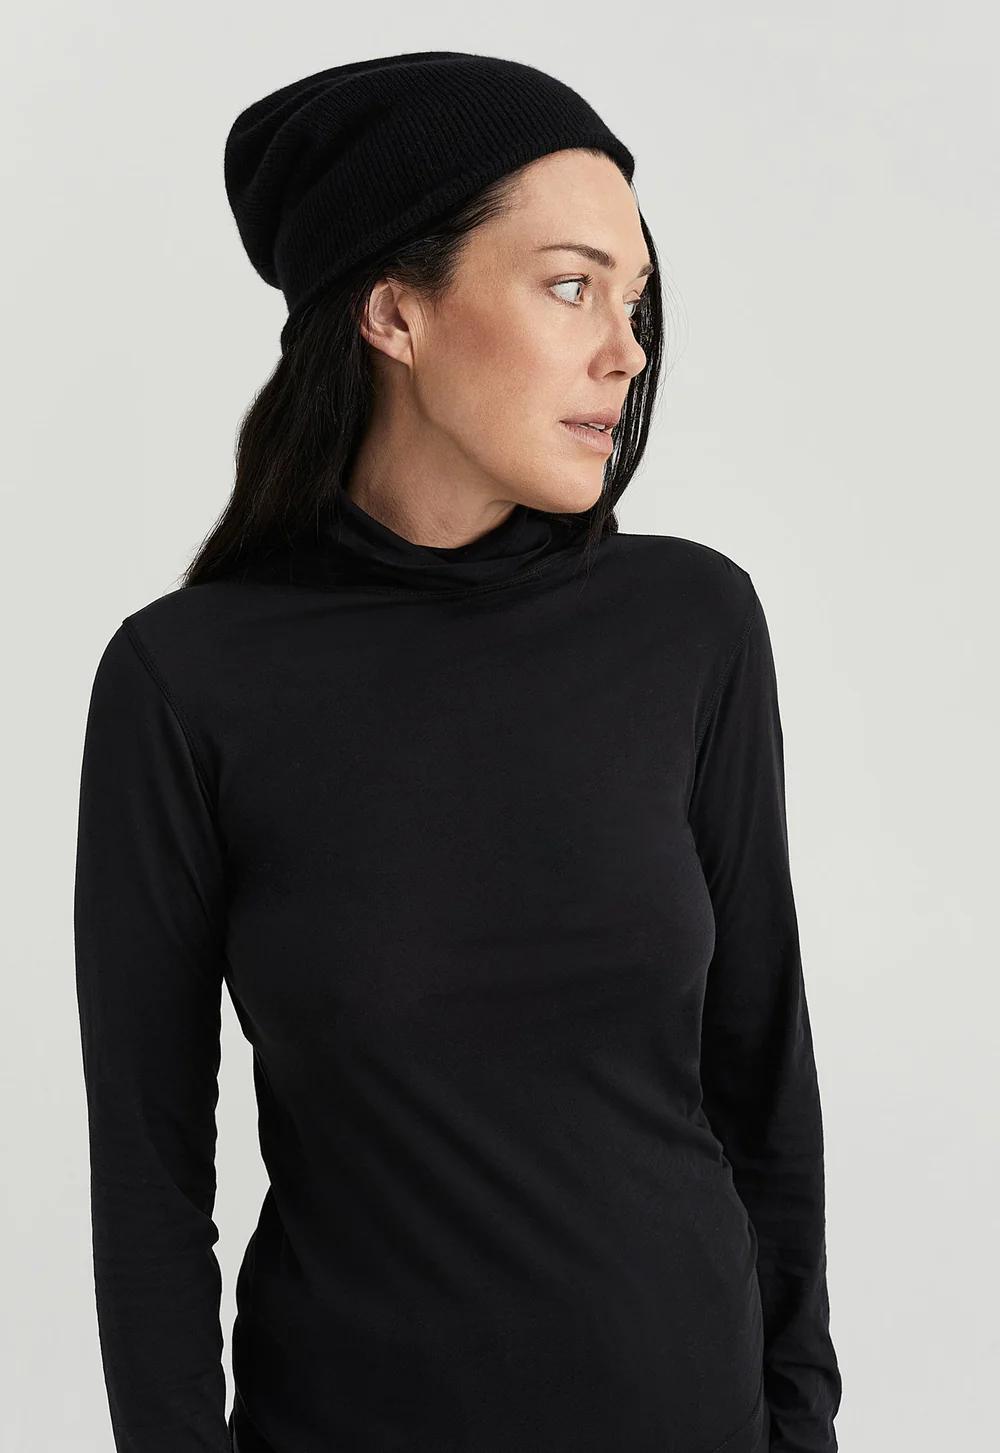 Cashmere Sweater for Valentine's Day